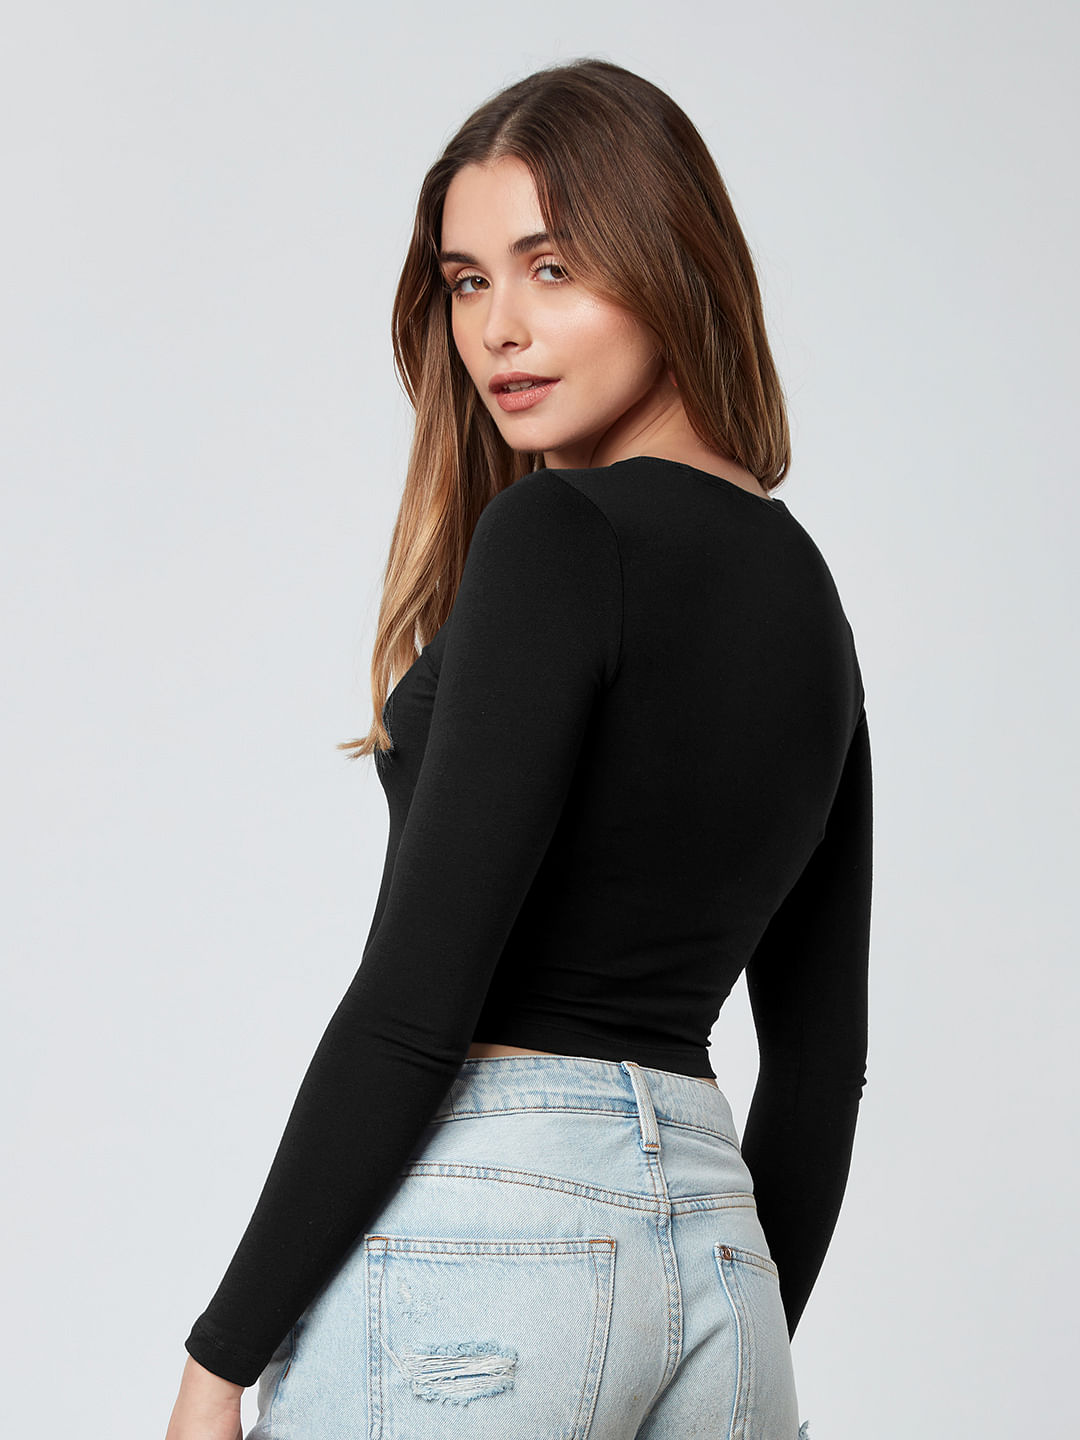 Buy Solids: Black (Cropped Fit) Women's Cropped Tops online at The ...